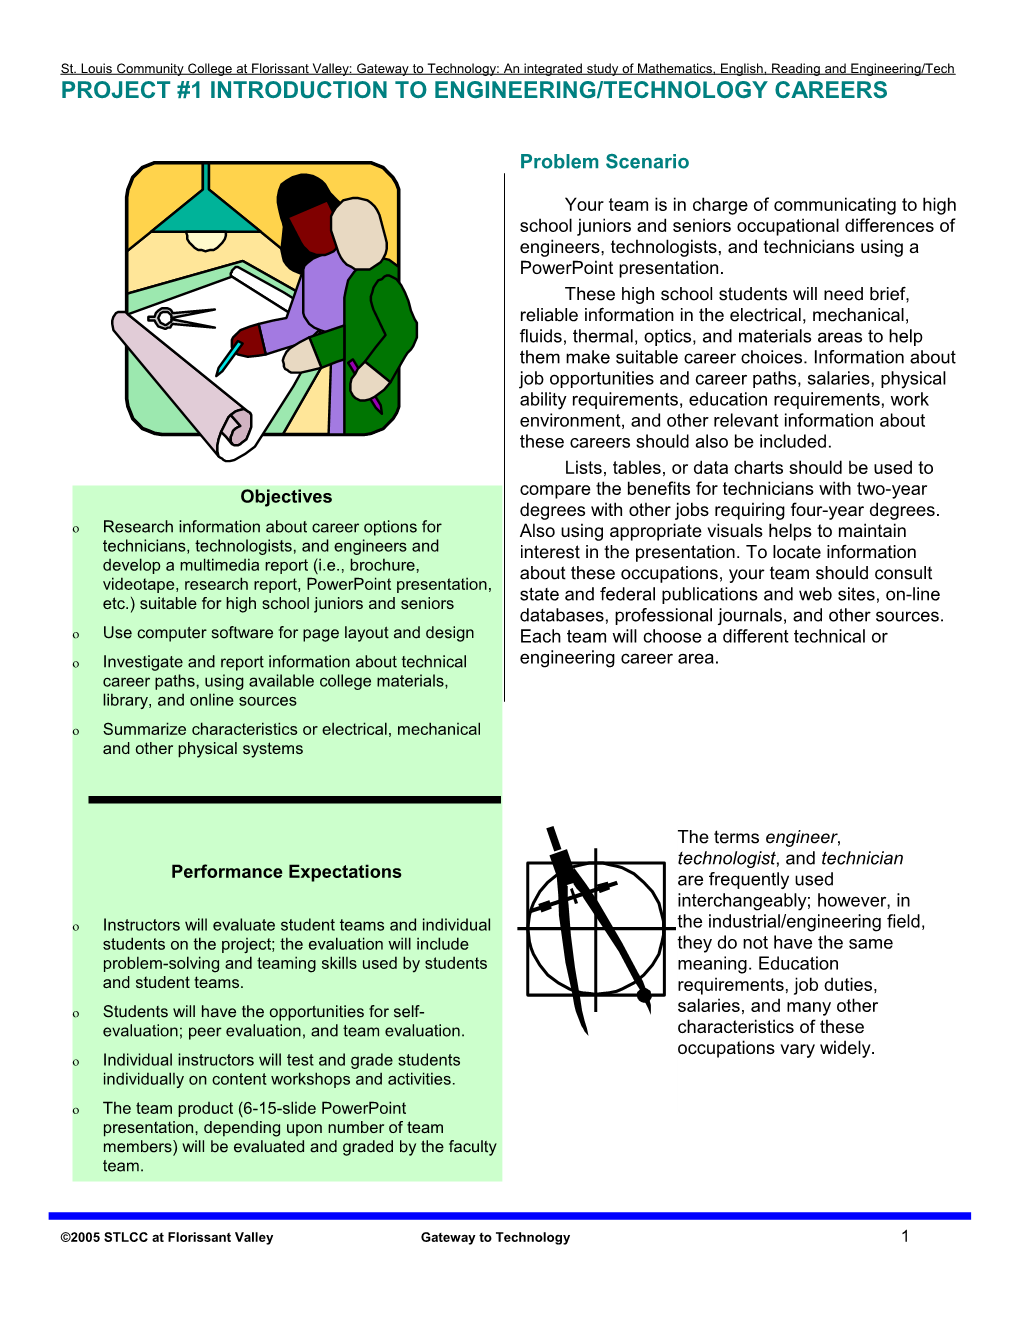 Student Handout: Project #1 Introduction to Engineering/Technology Careers